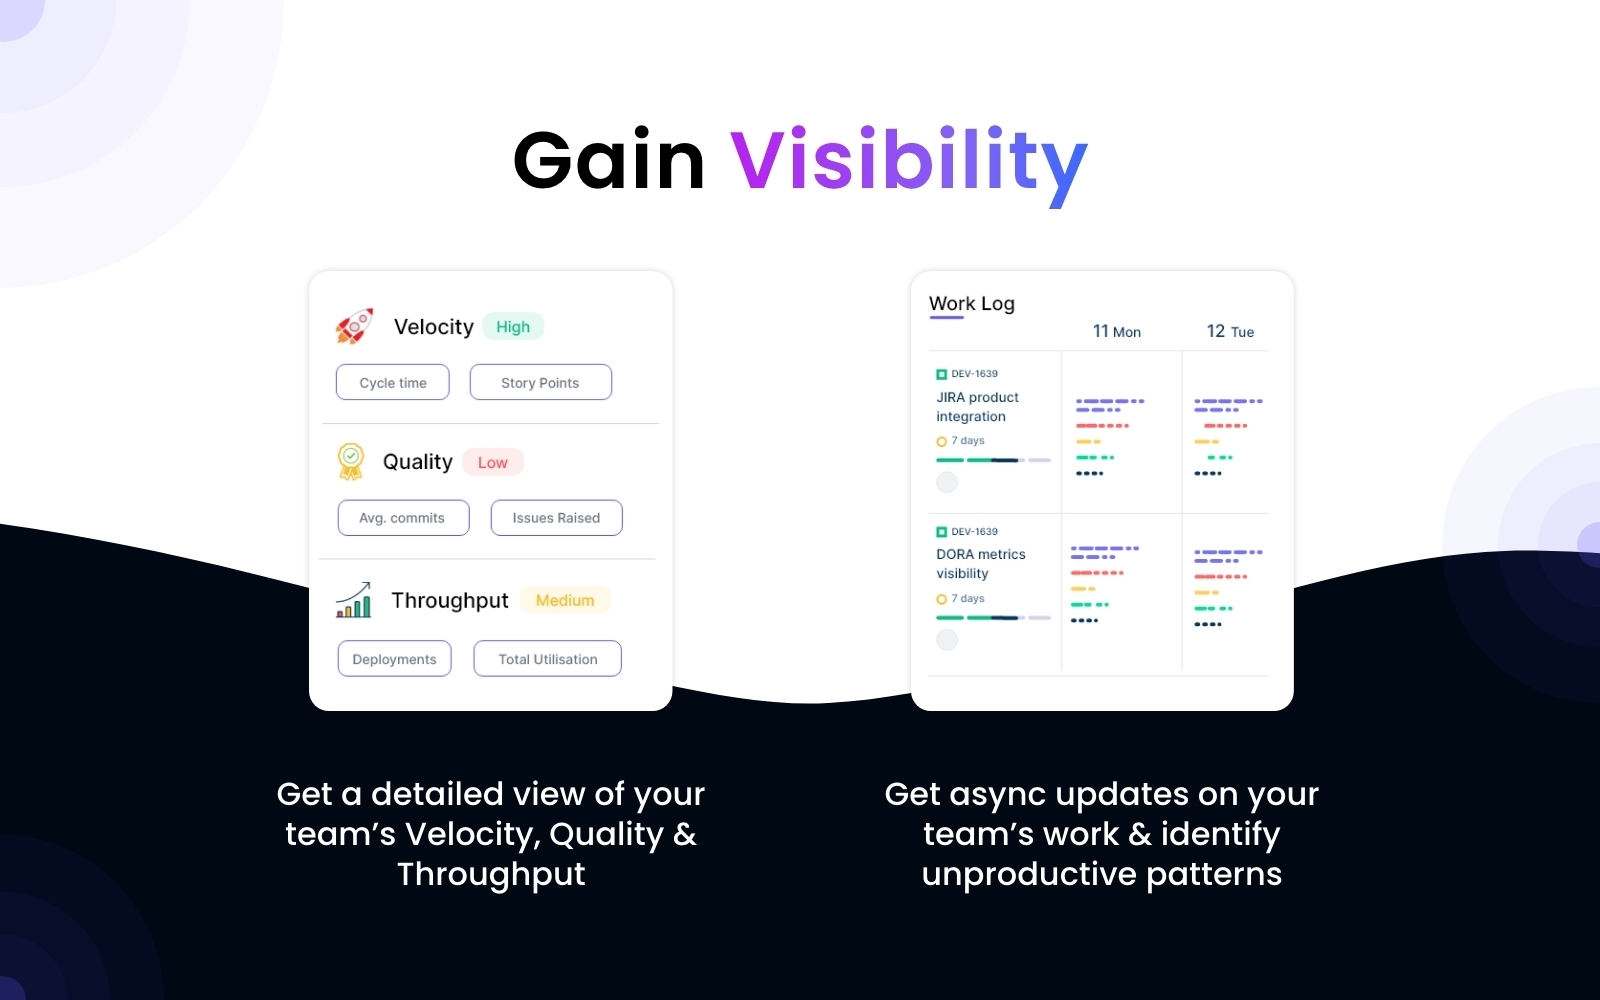 No more guessing, get granular visibility to manage your team better with objective data